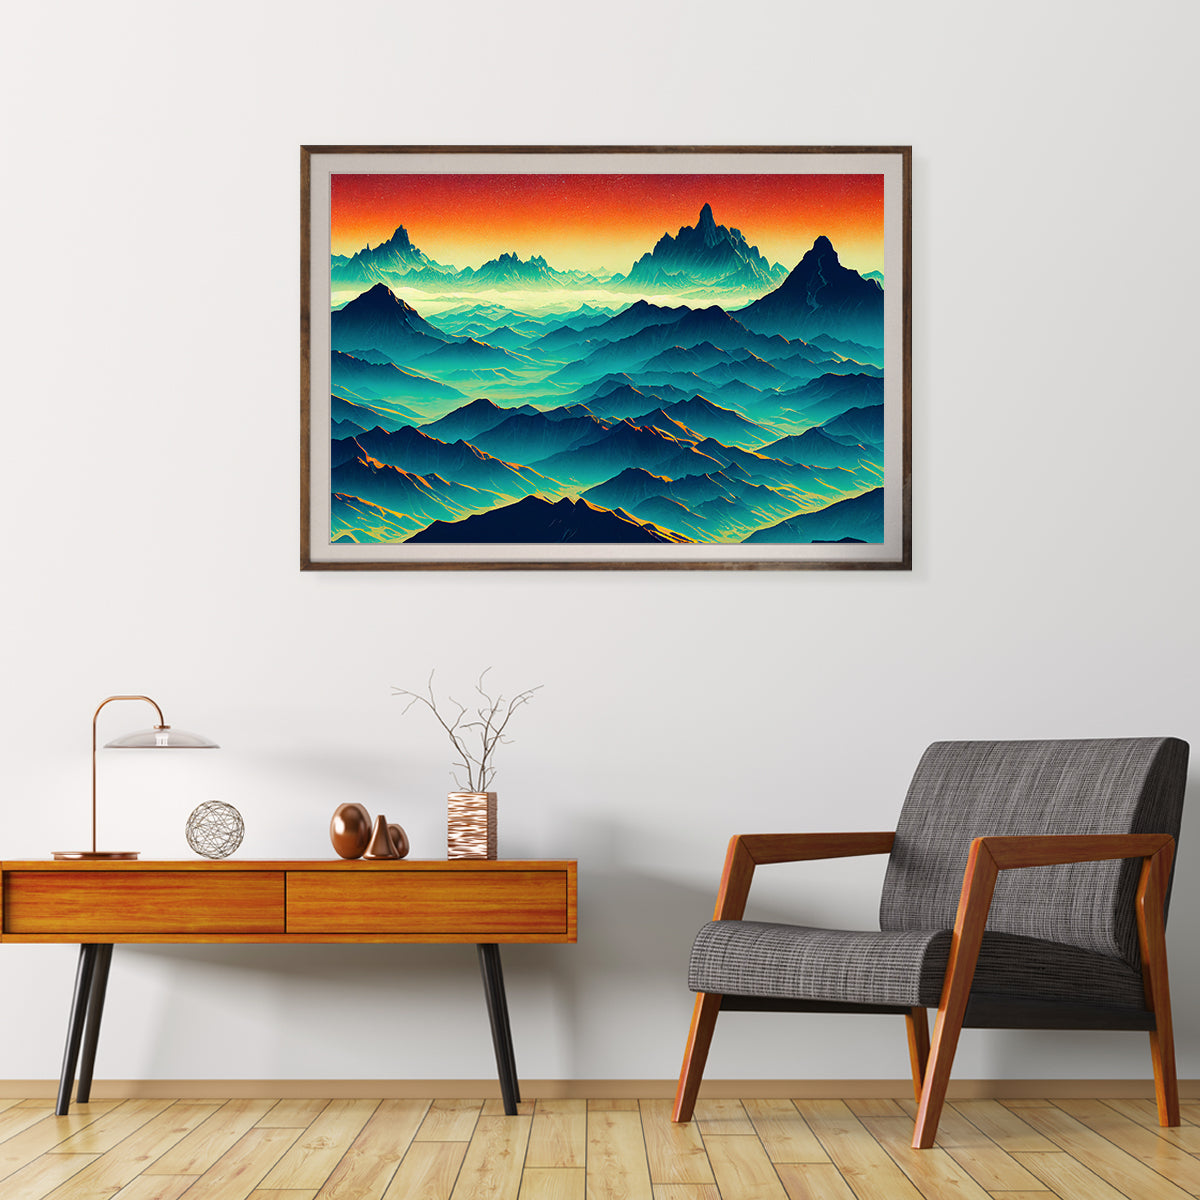 Abstract Mountain Landscape Posters For Home Office-Horizontal Posters NOT FRAMED-CetArt-10″x8″ inches-CetArt